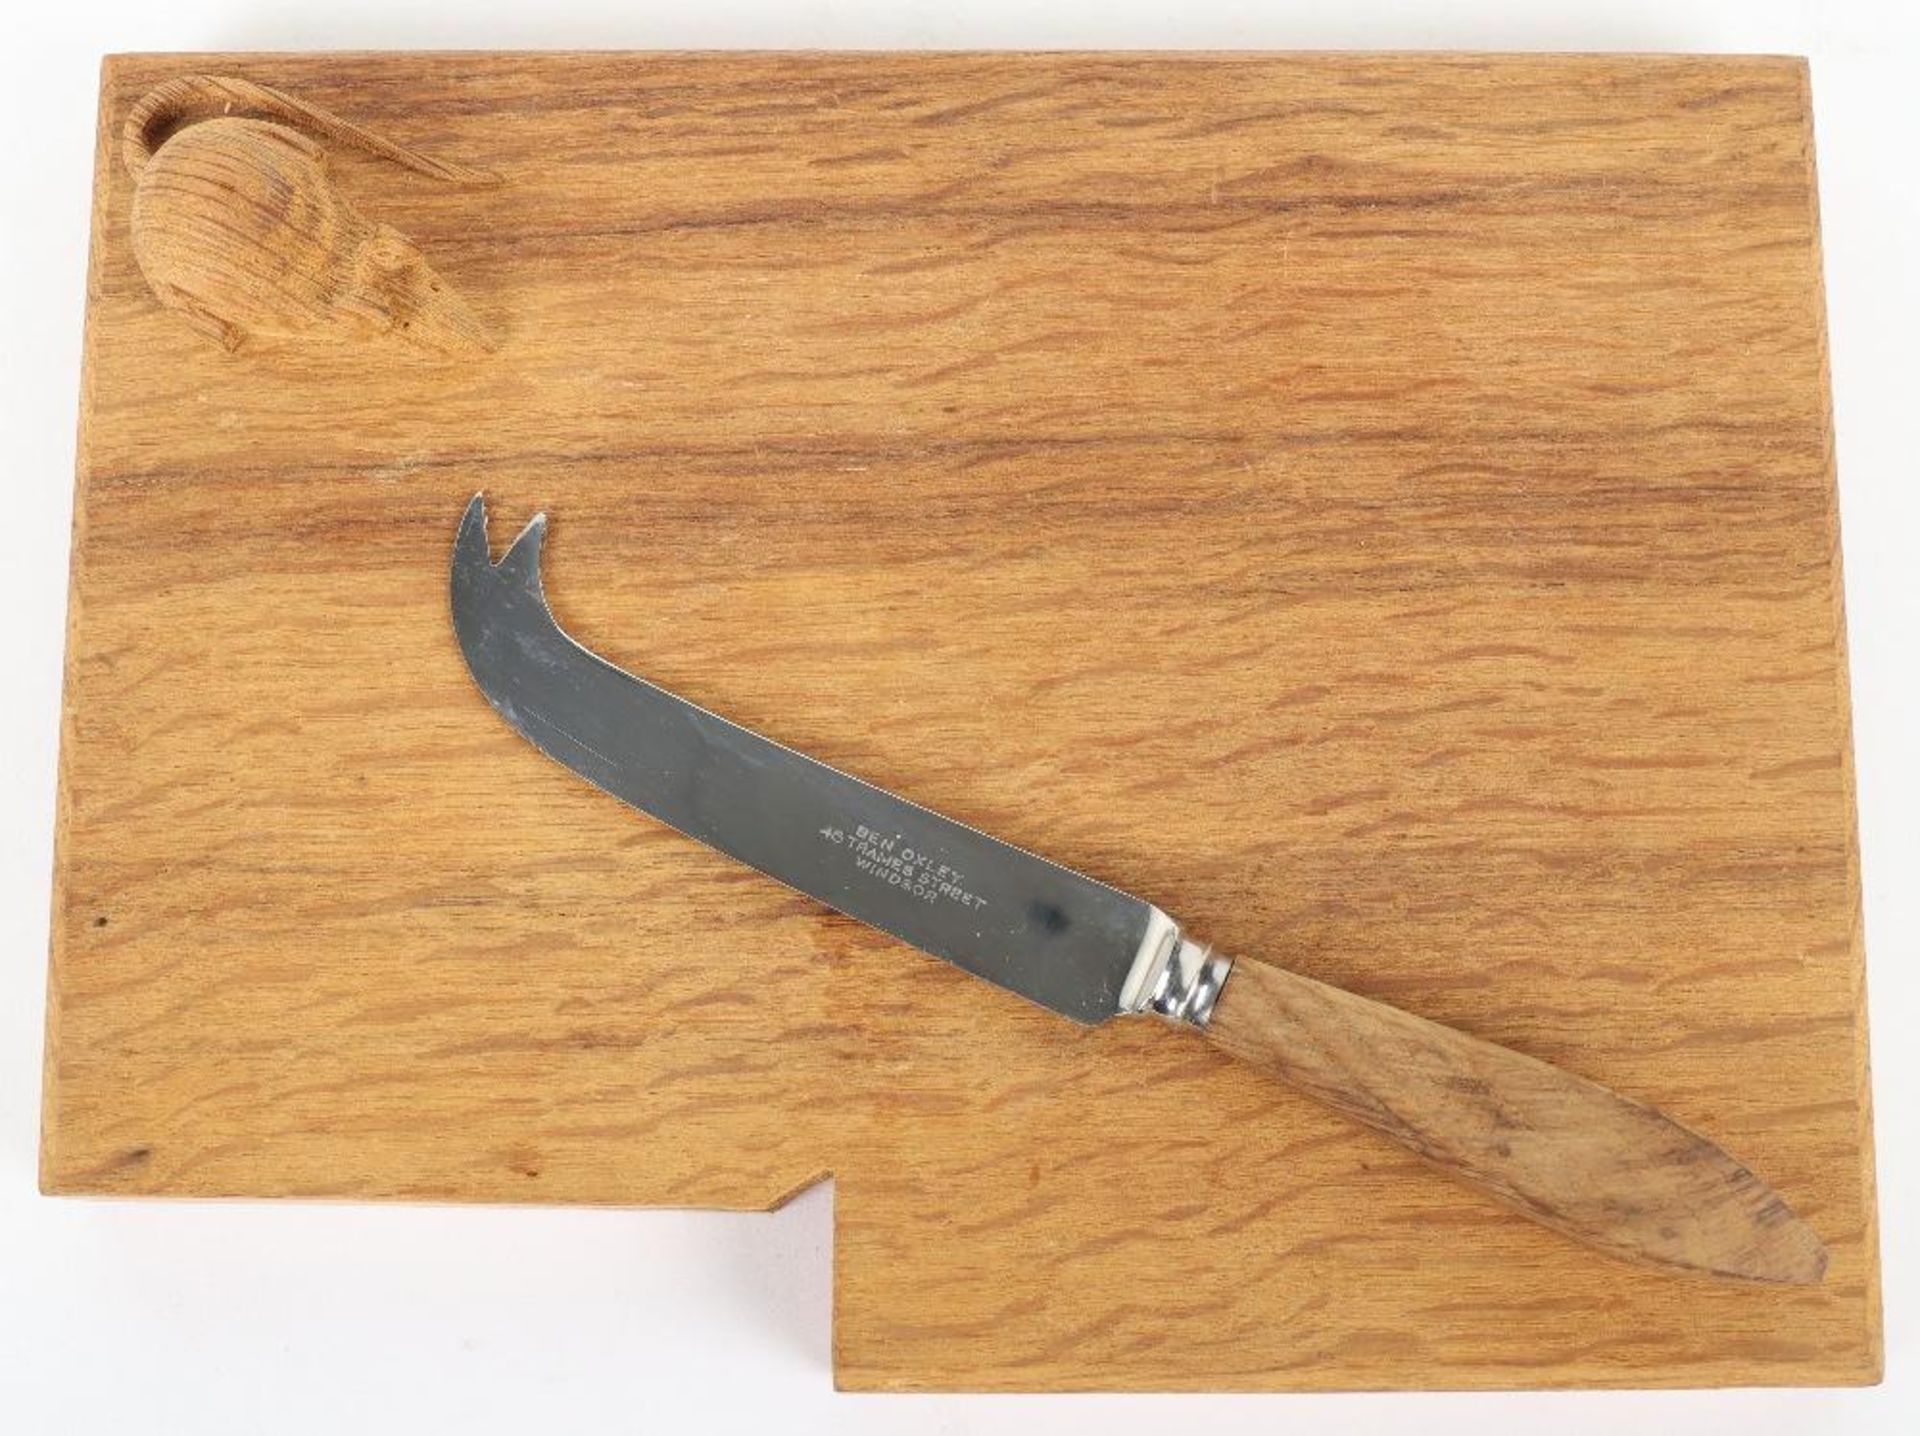 A Ben Oxley Mouse cheeseboard, with knife - Image 3 of 3